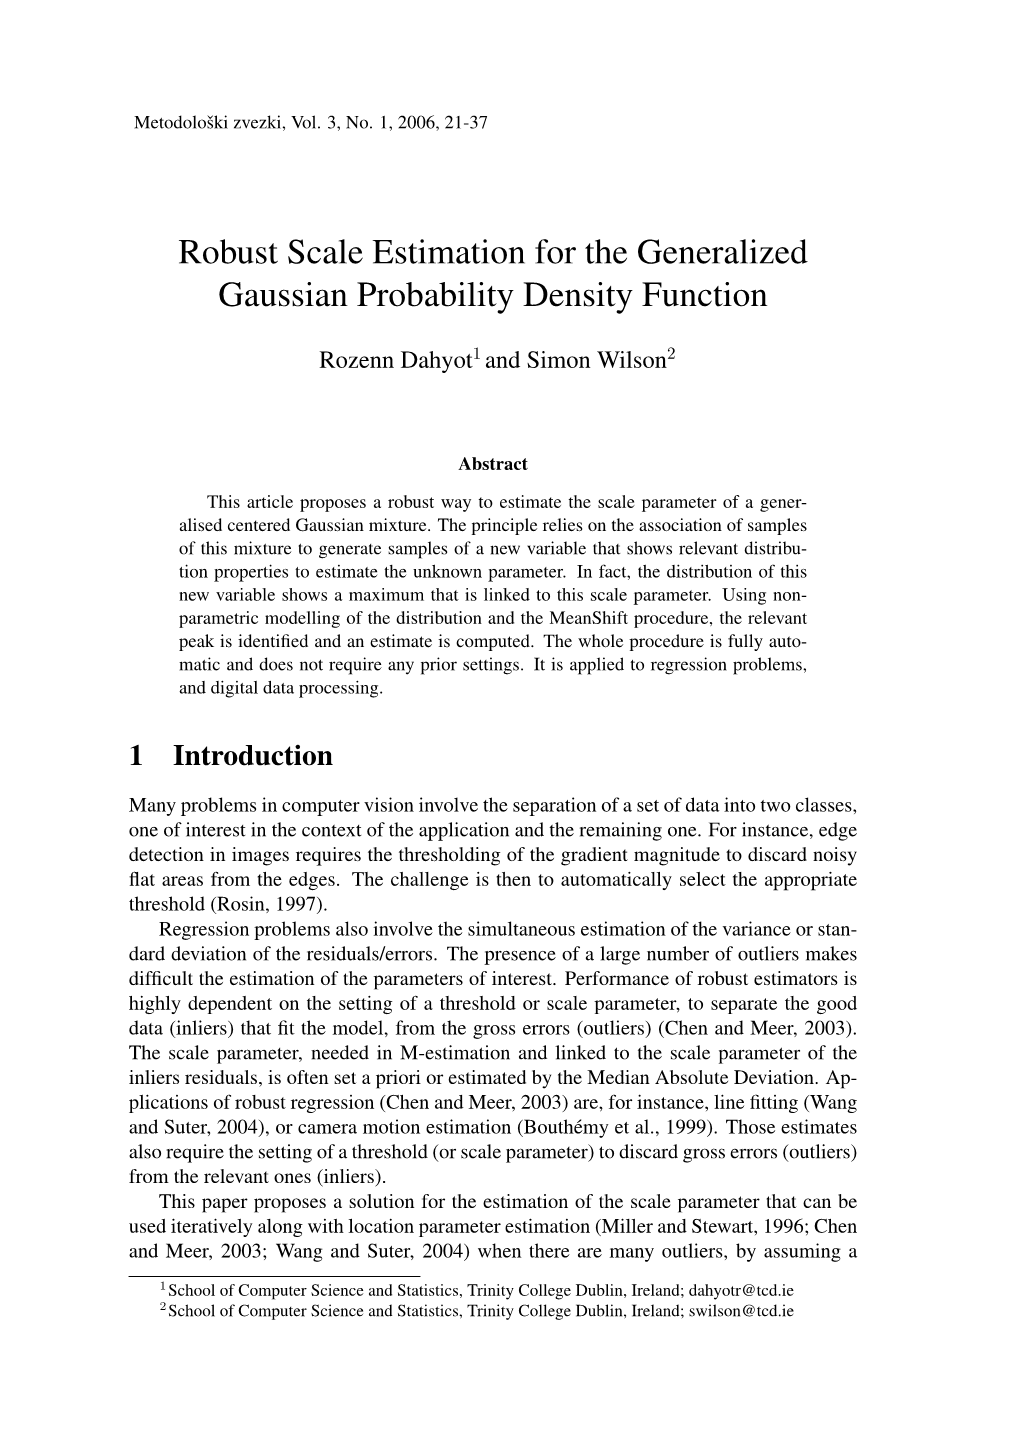 Robust Scale Estimation for the Generalized Gaussian Probability Density Function